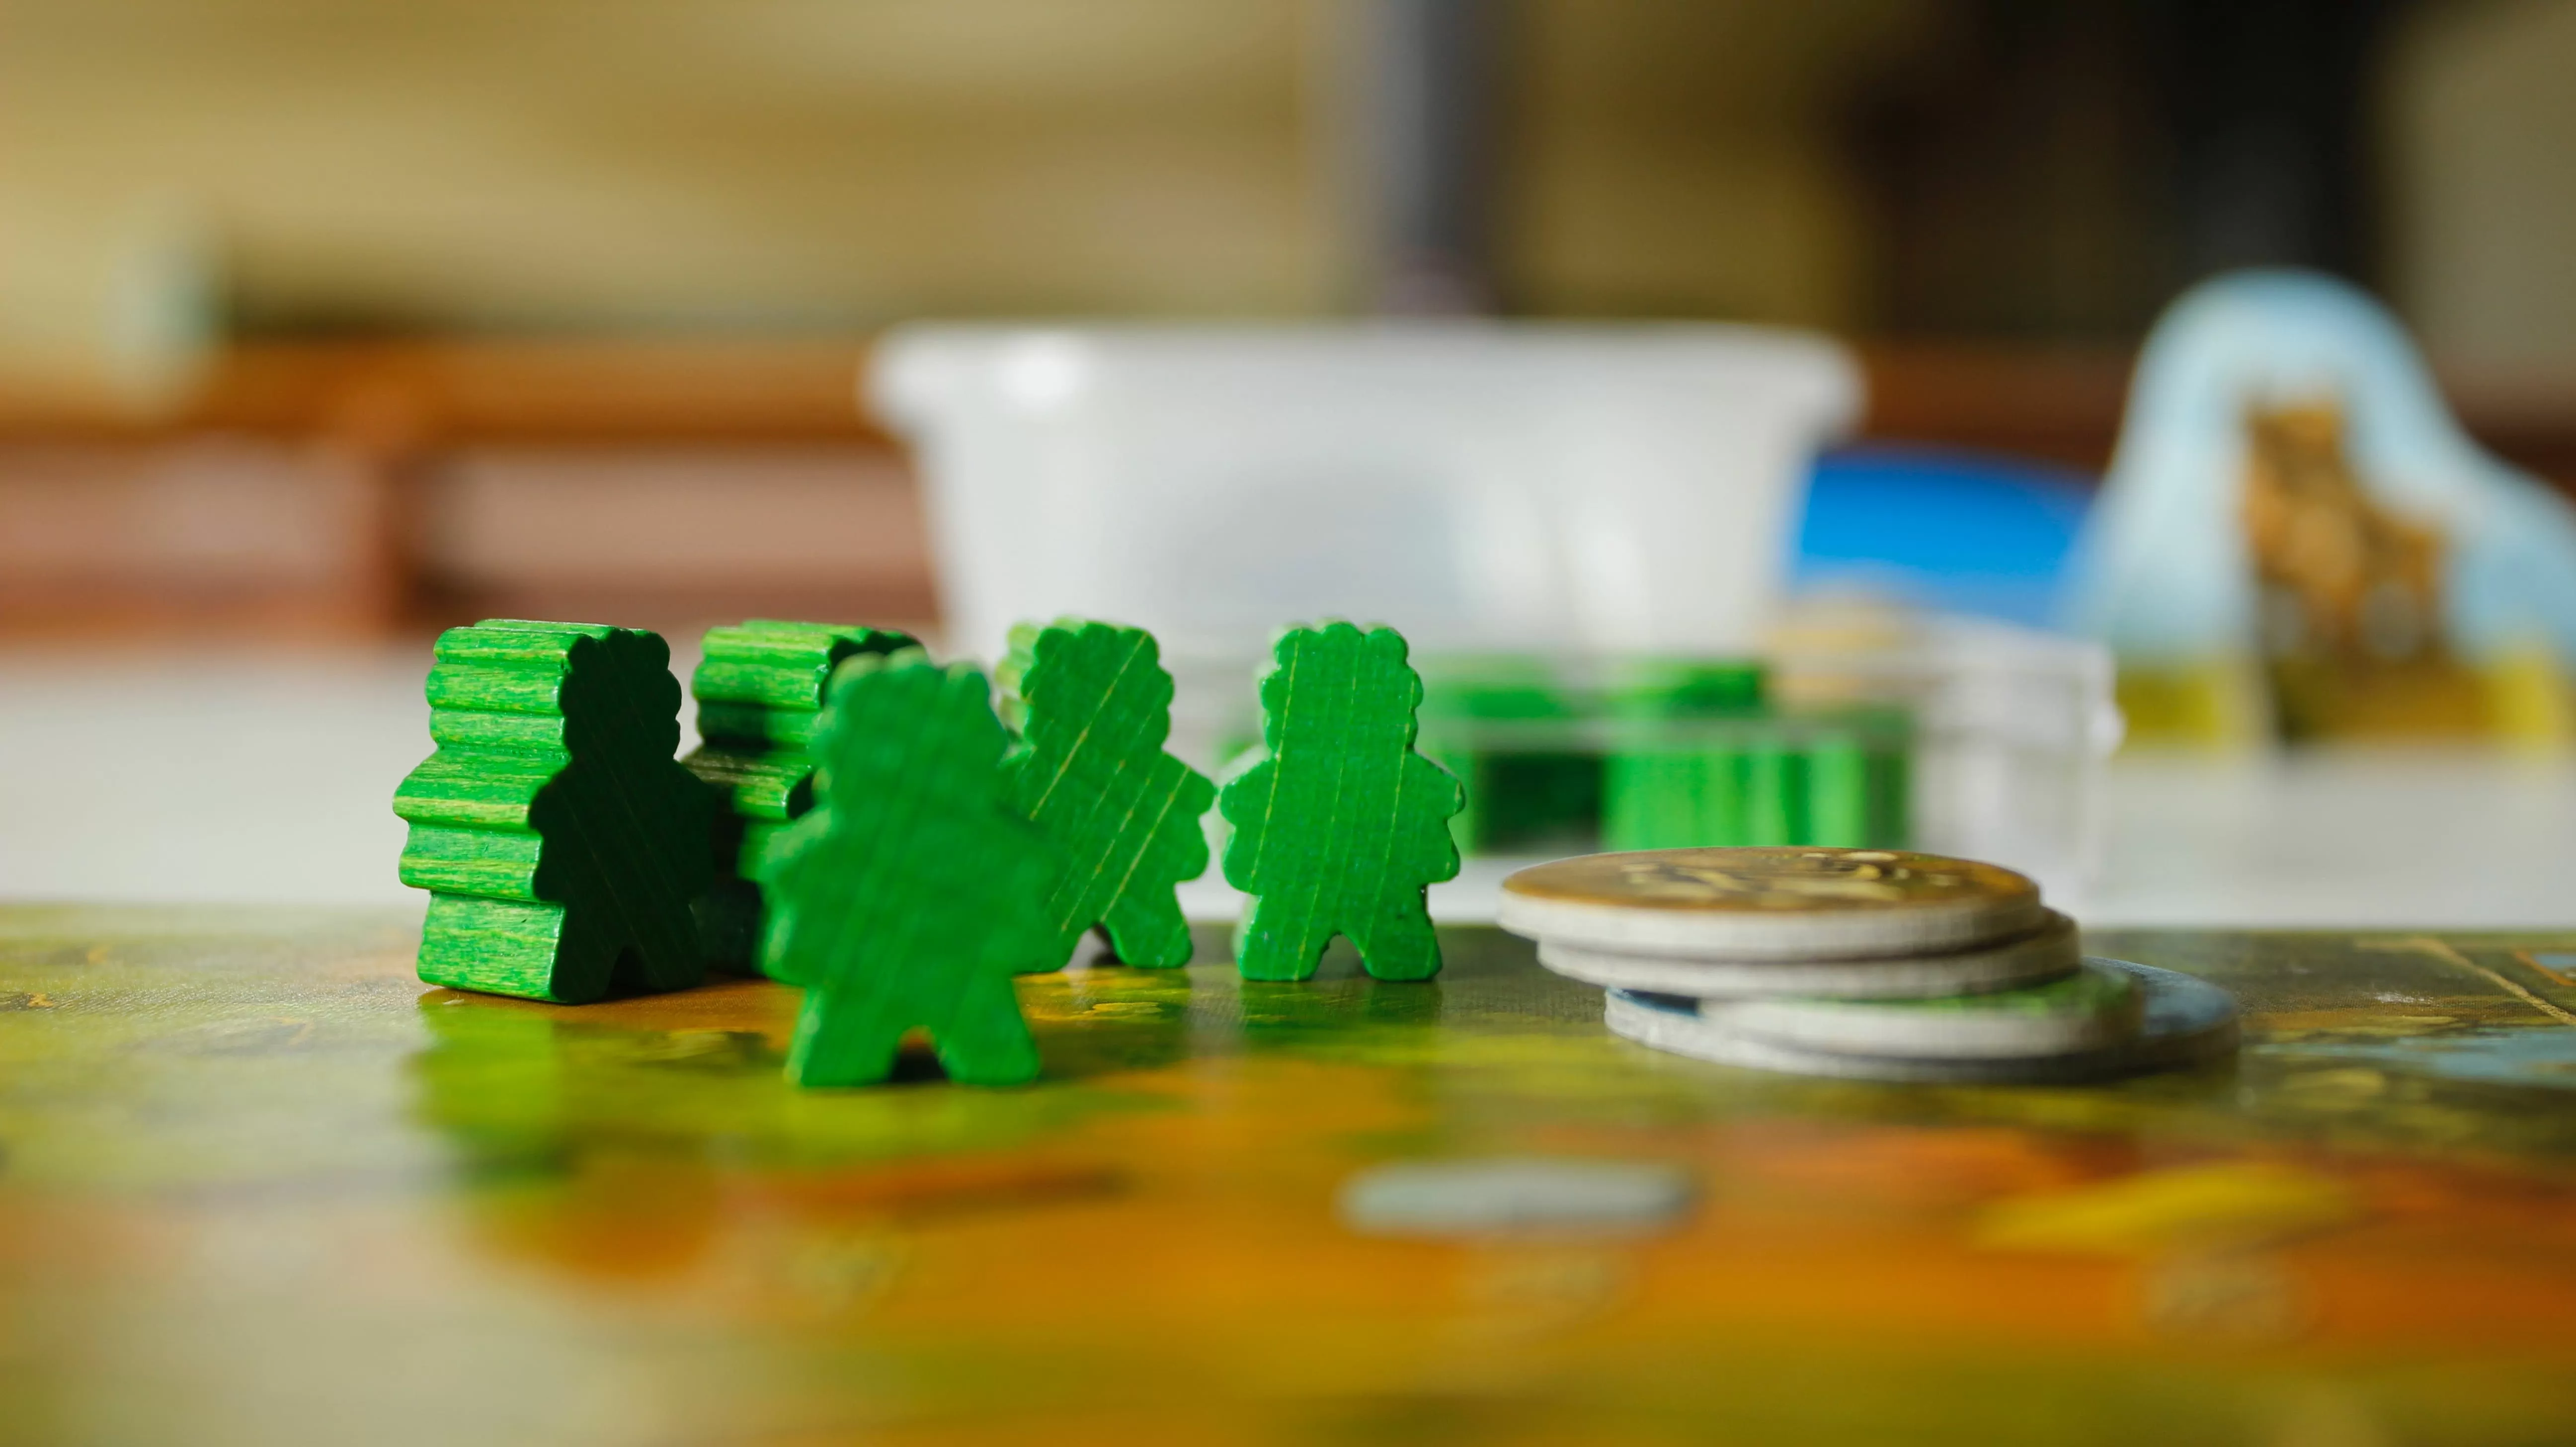 Meeple Wood Game Pieces - determine your kickstarter funding goal by making sure you've accounted for all pieces in your game